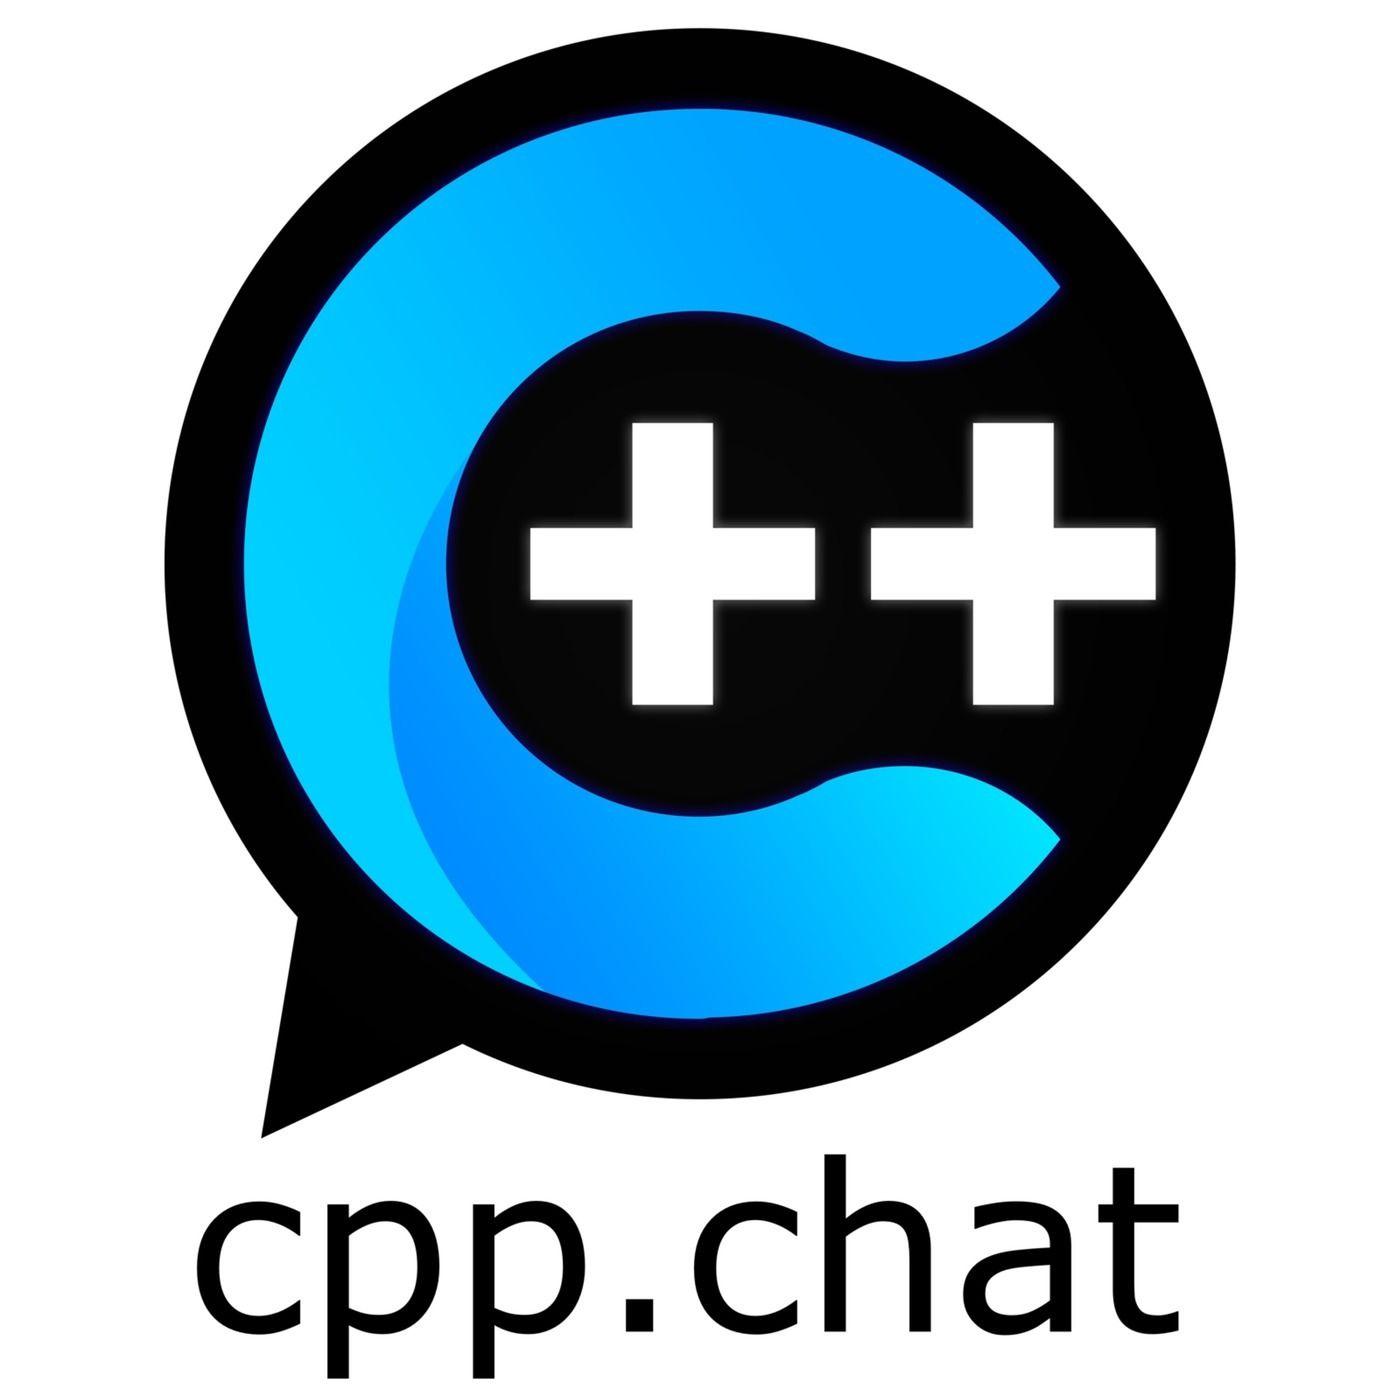 Well Known Cross Logo - cpp.chat Episode 45: The Things I'm Well Known for Are Javascript